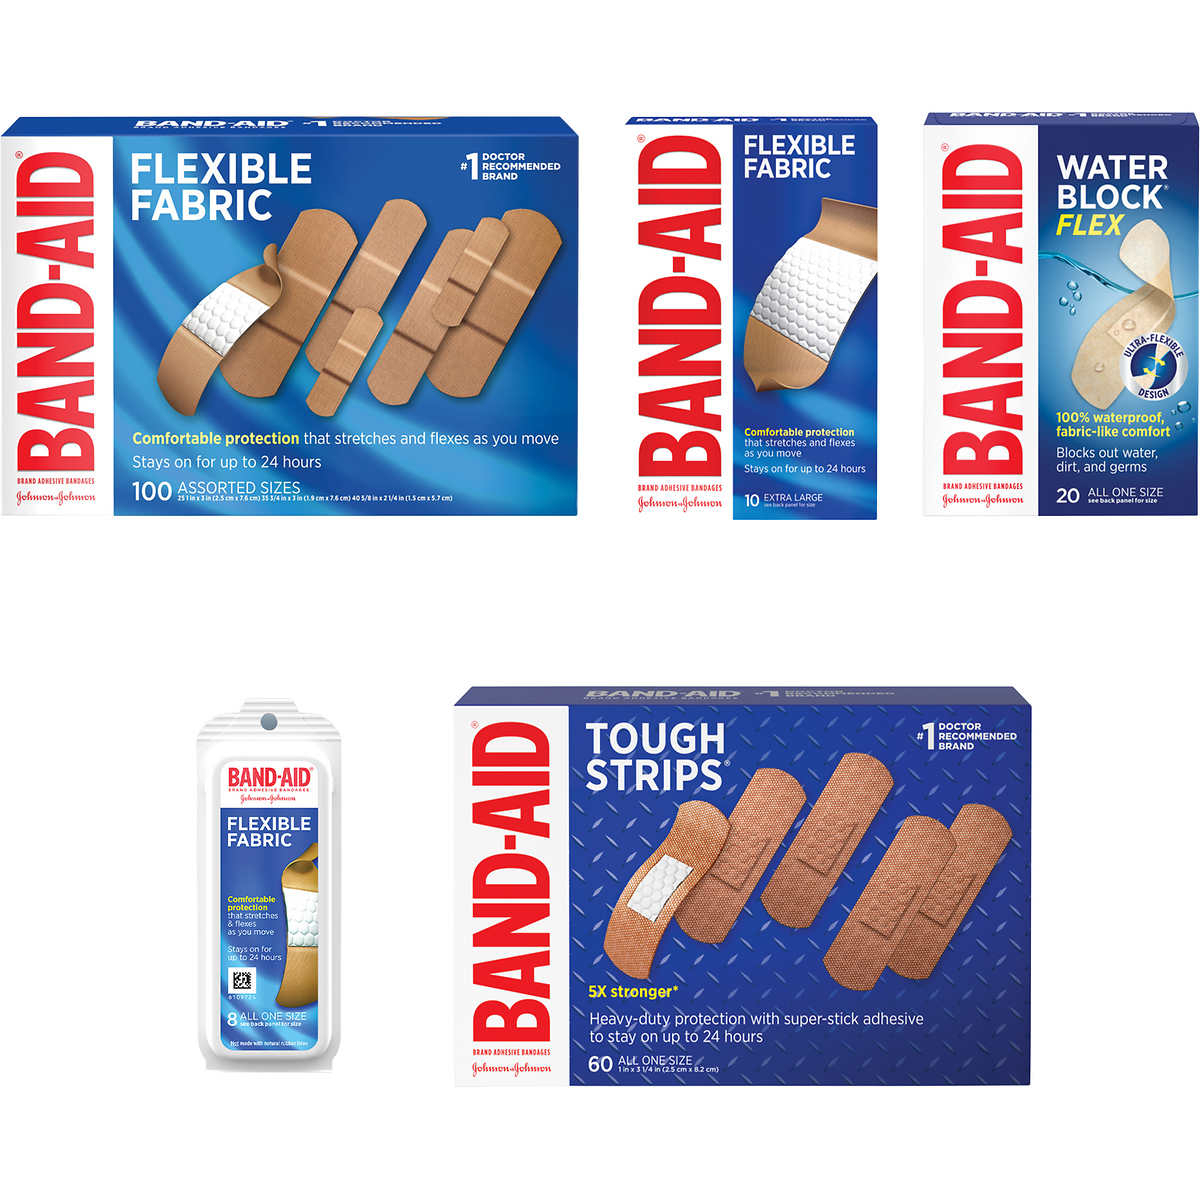 Band-Aid Adhesive Bandages, Assorted, 198 Count